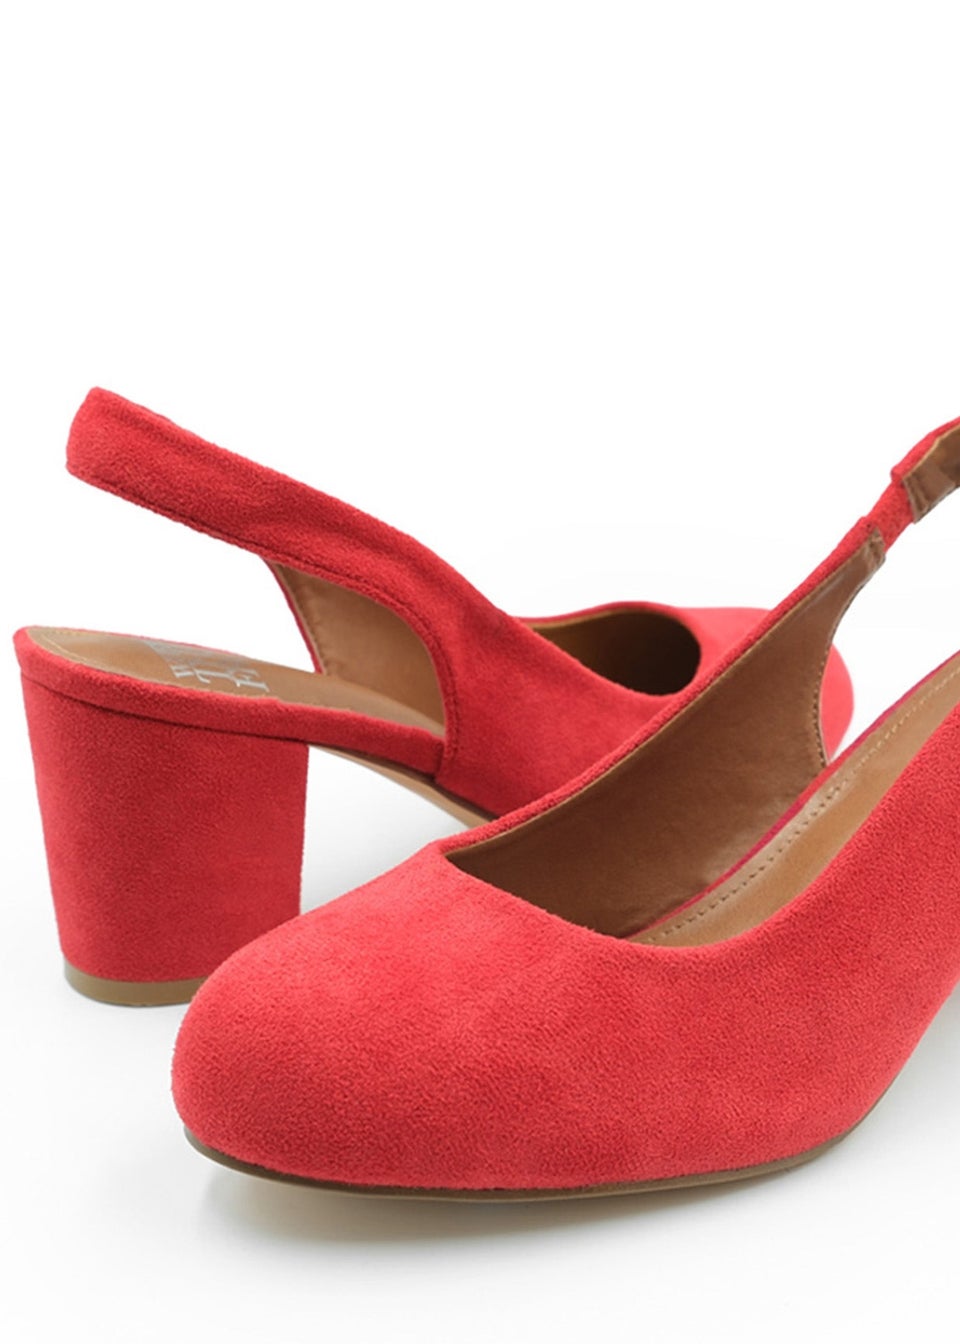 Where's That From Red Suede Edith Block Heel Slingback Shoes